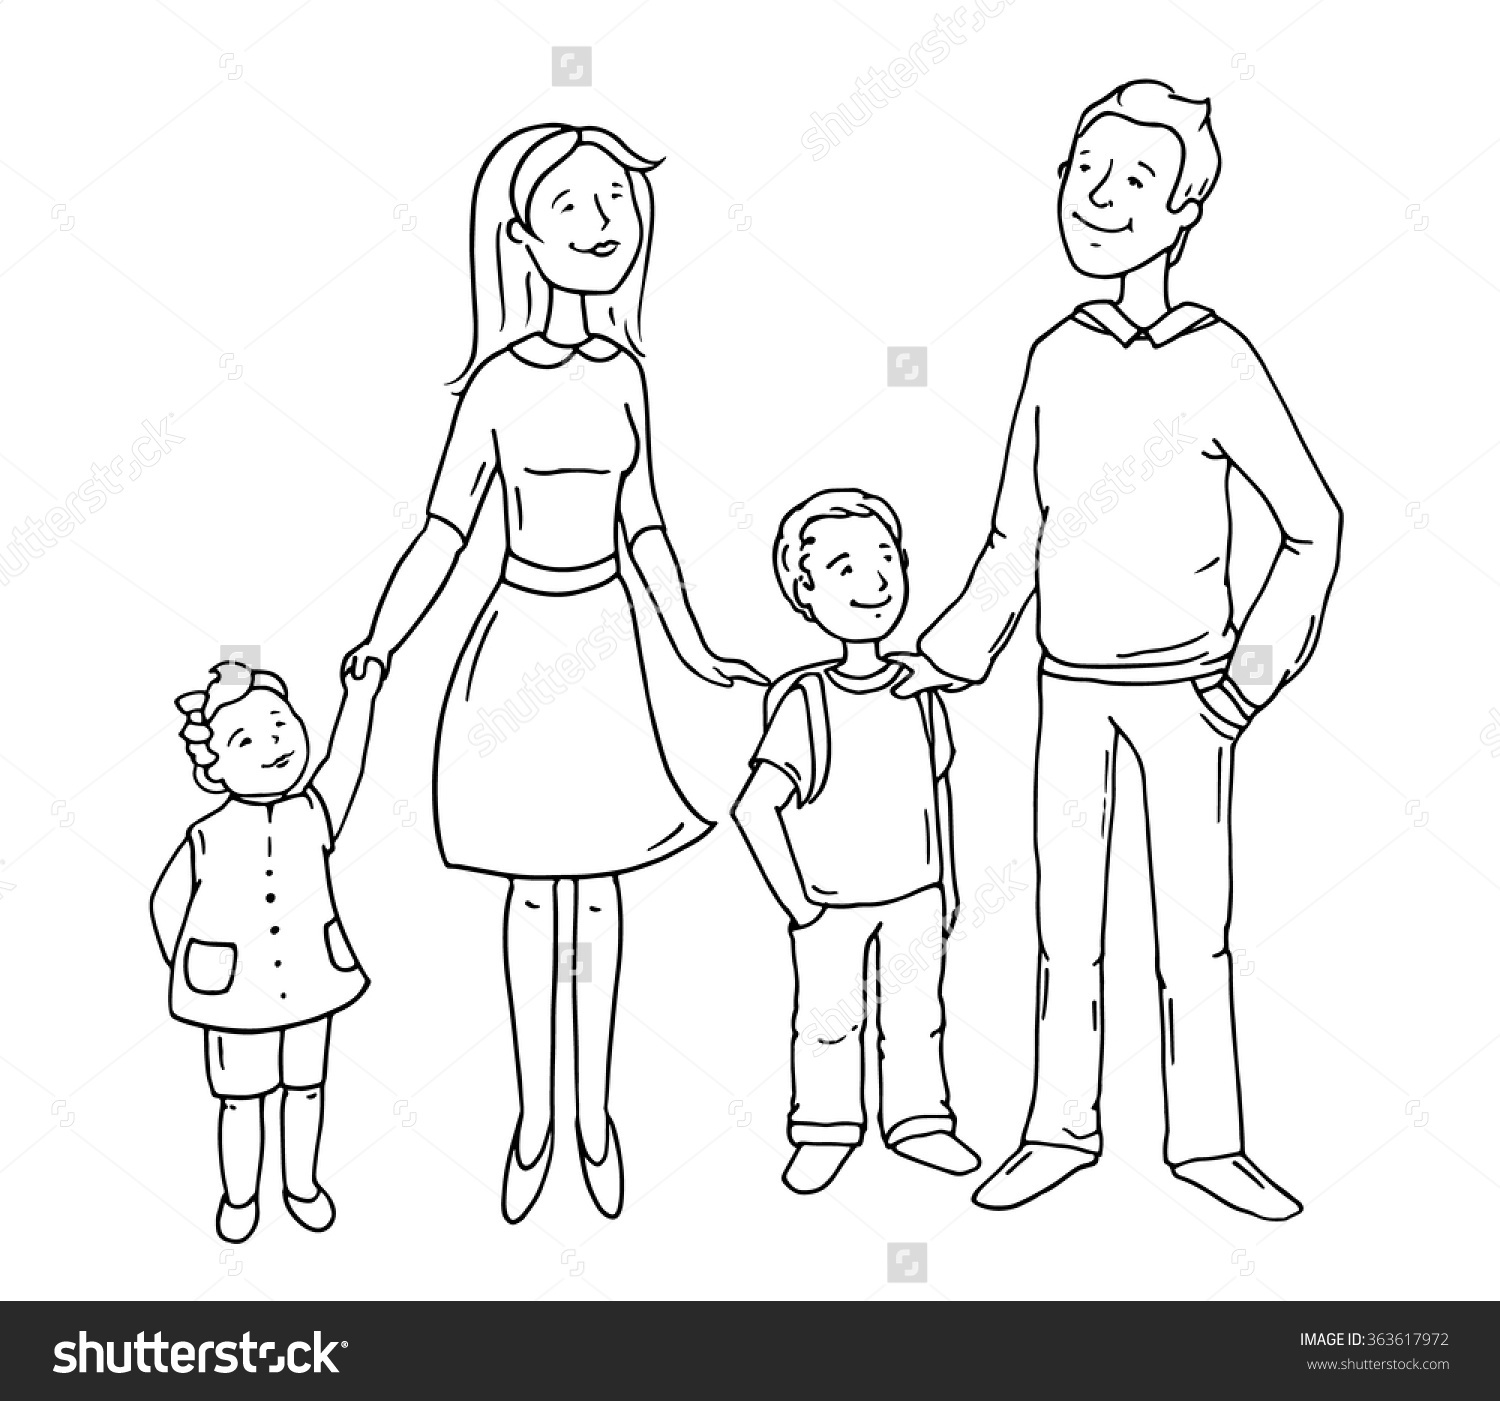 cute drawn family clipart - Clipground